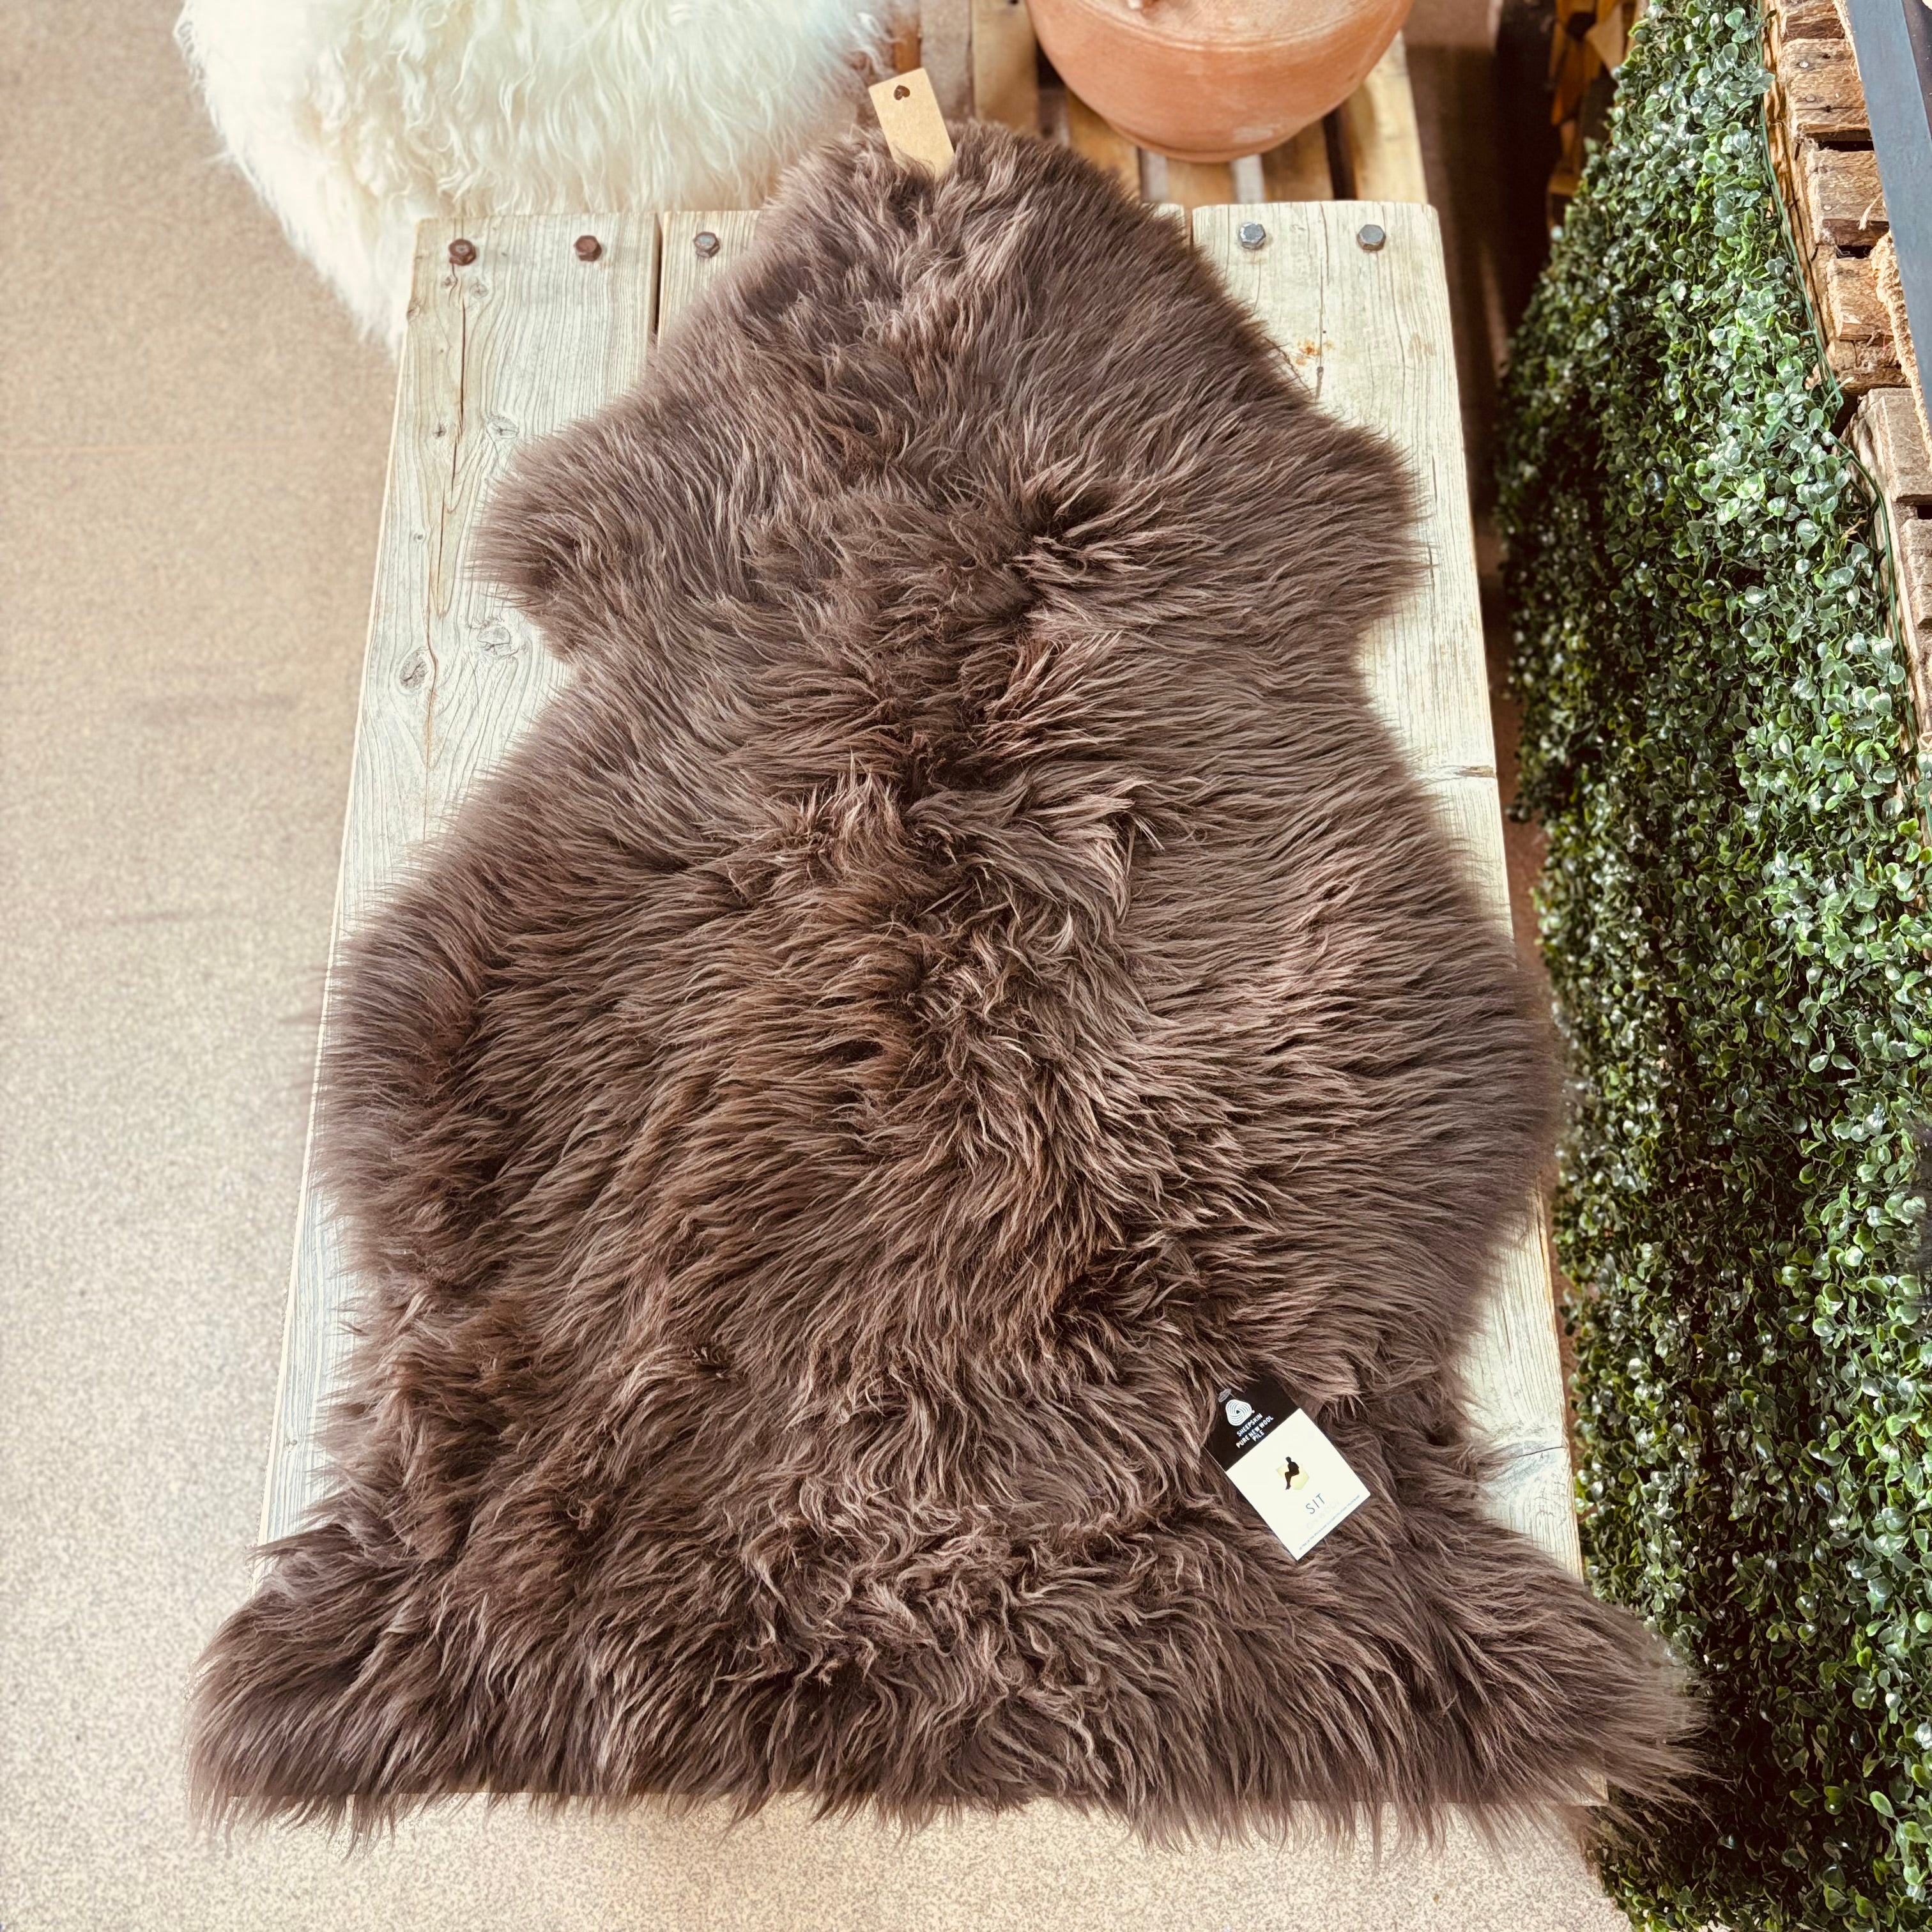 Introducing our Extra Large Sheepskin Rug